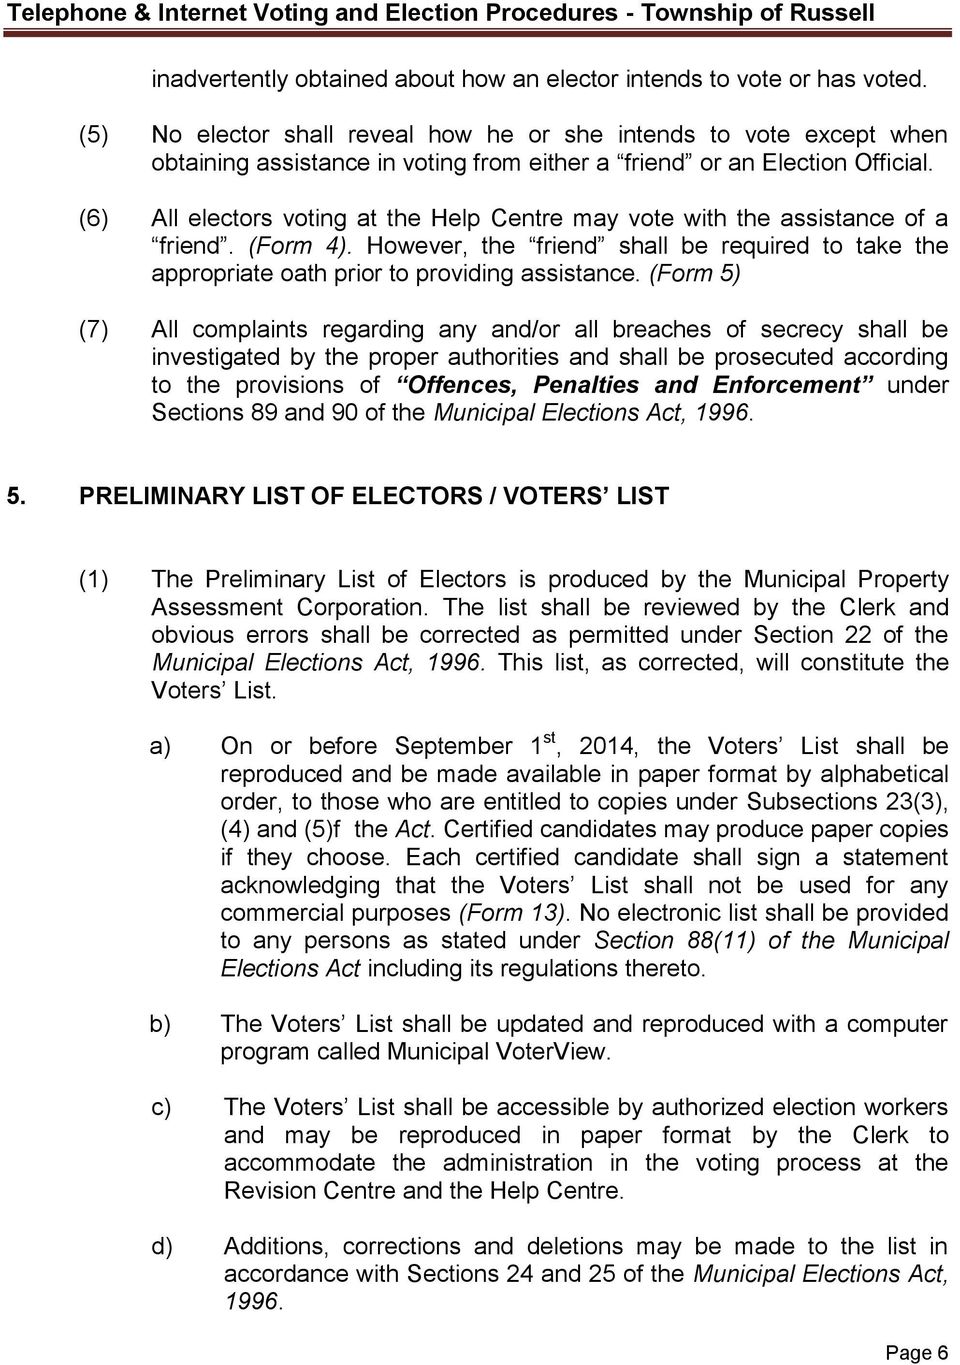 (6) All electors voting at the Help Centre may vote with the assistance of a friend. (Form 4). However, the friend shall be required to take the appropriate oath prior to providing assistance.